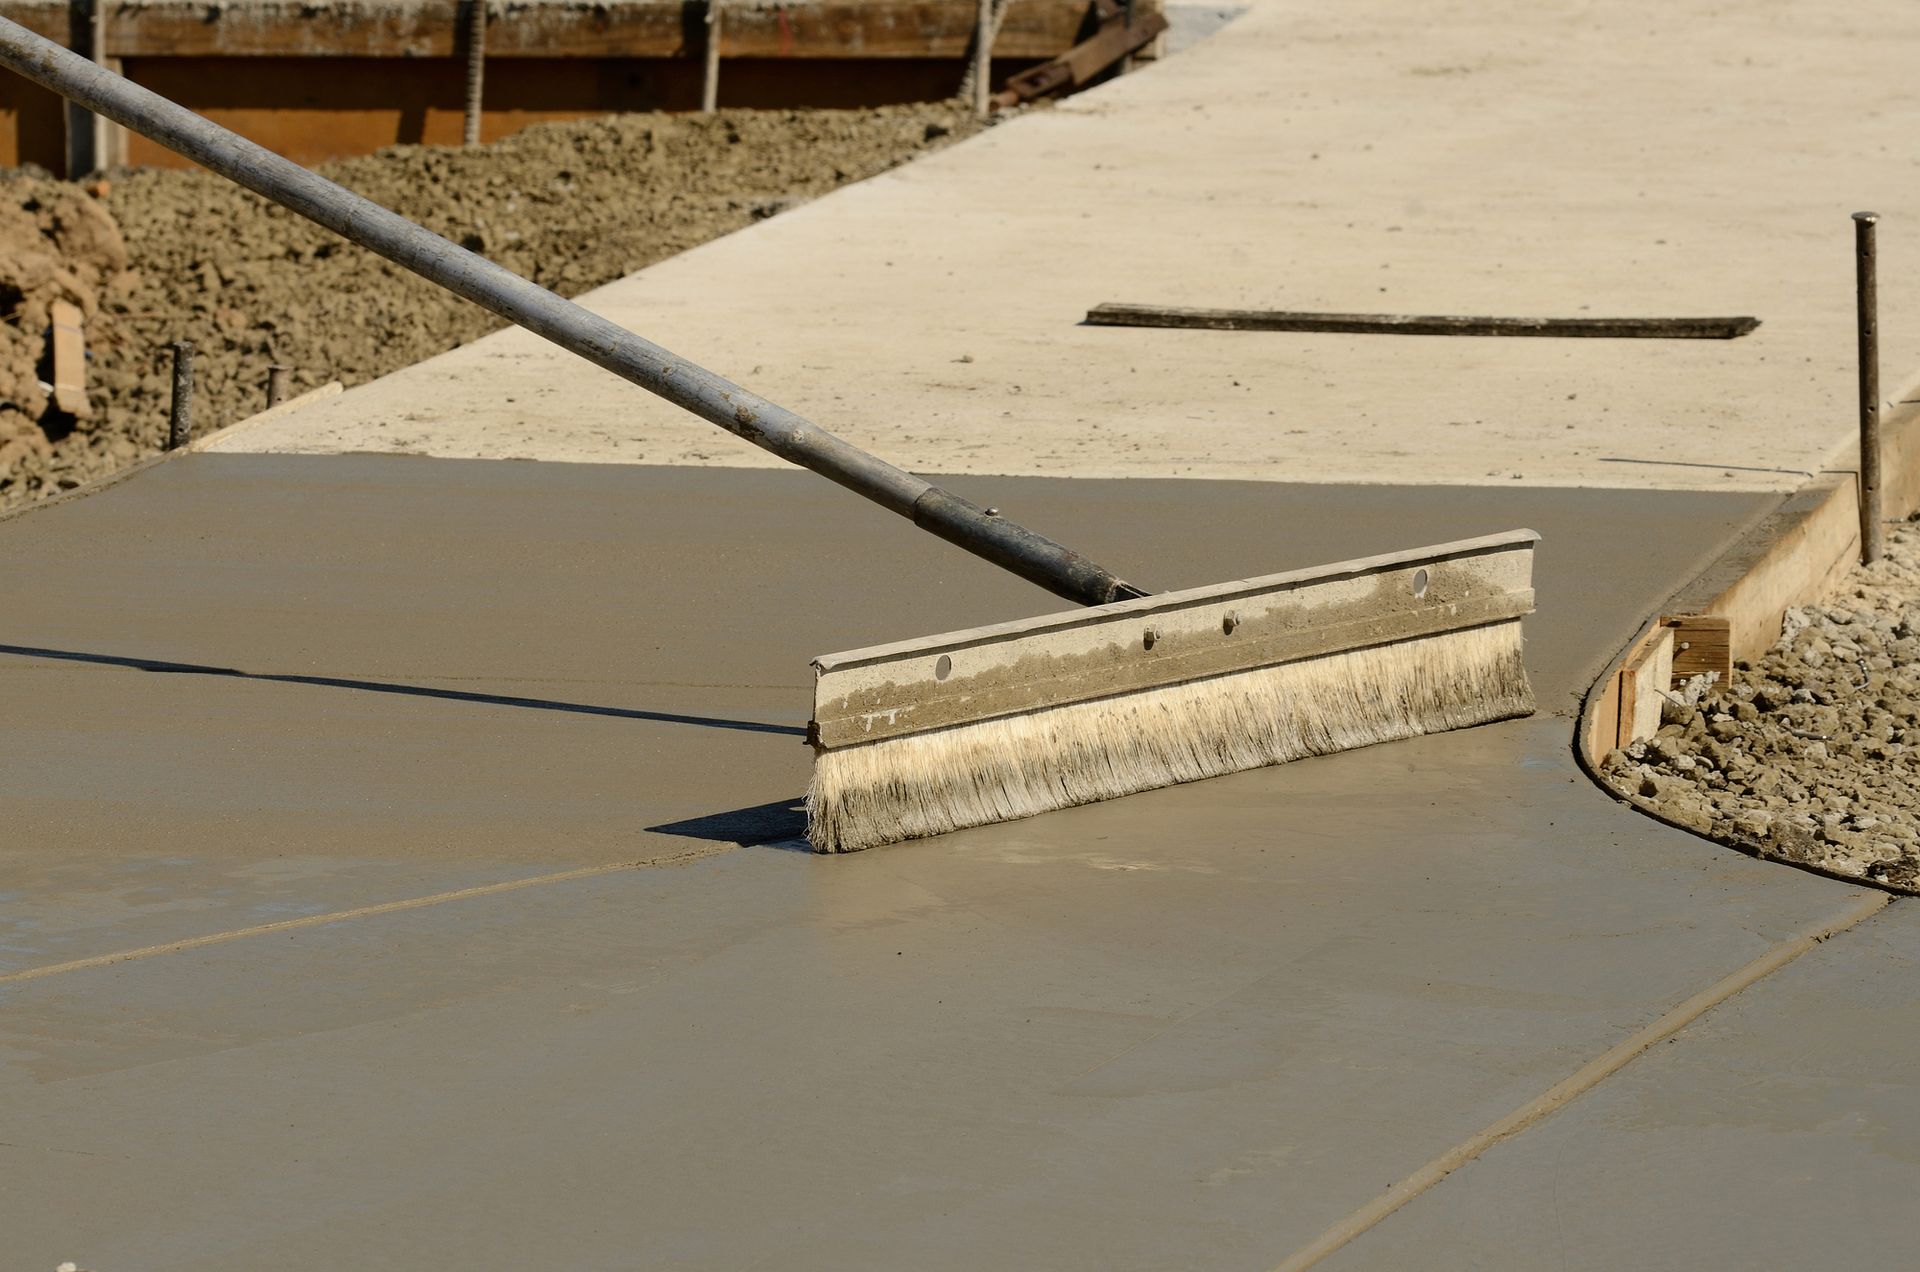 A concrete contractor in Palm City, FL is using a long-handled tool to smooth freshly poured concrete on a construction site. The wet concrete stretches out in a curved pathway, bordered by wooden forms, ready for stamped concrete. The surrounding area shows bare earth and construction materials.